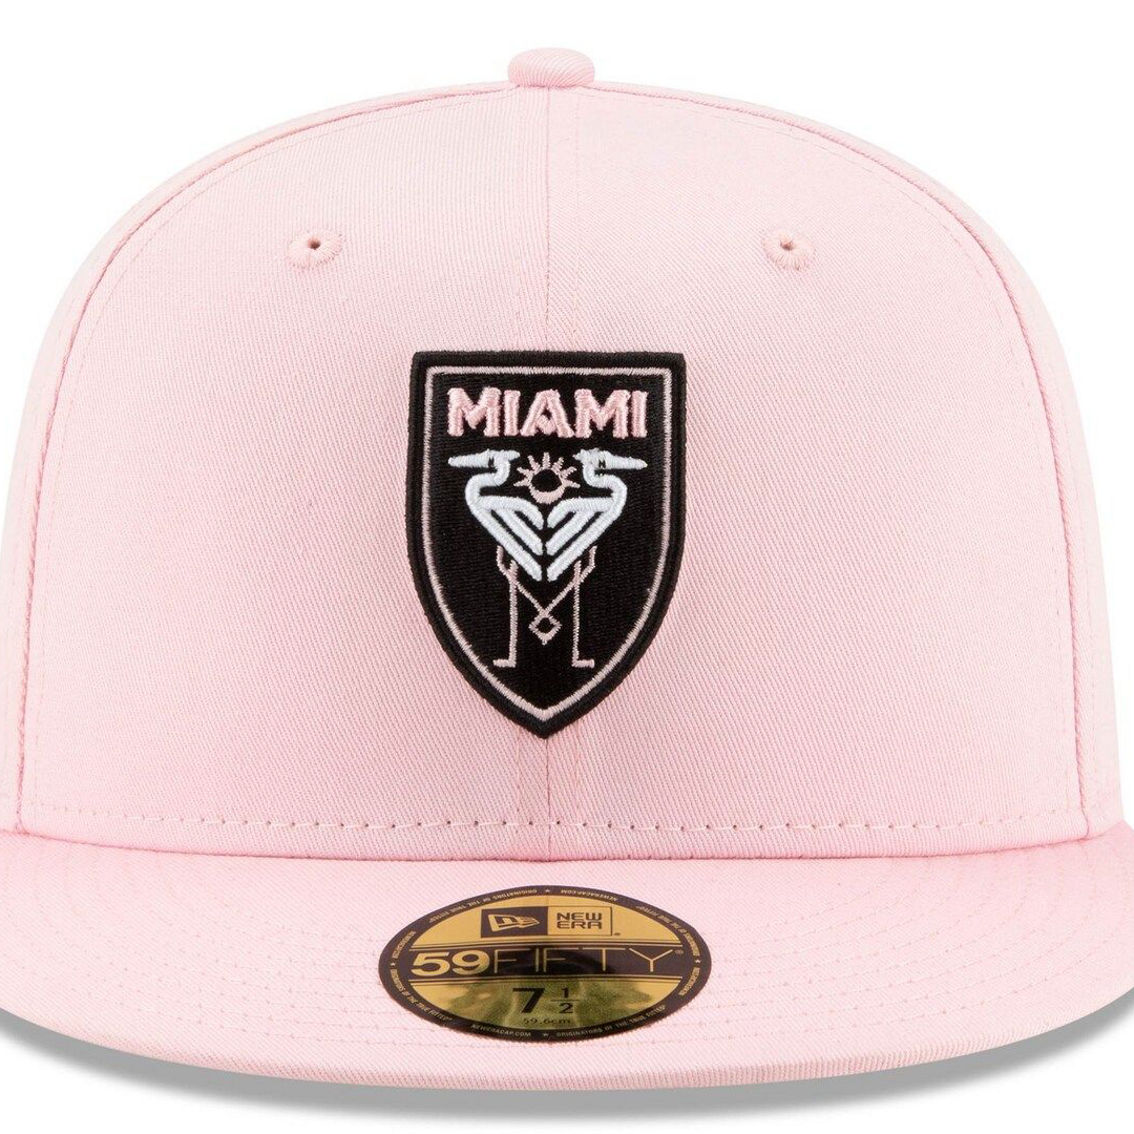 Men's New Era Pink Inter Miami CF Primary Logo 59FIFTY Fitted Hat - Image 3 of 4